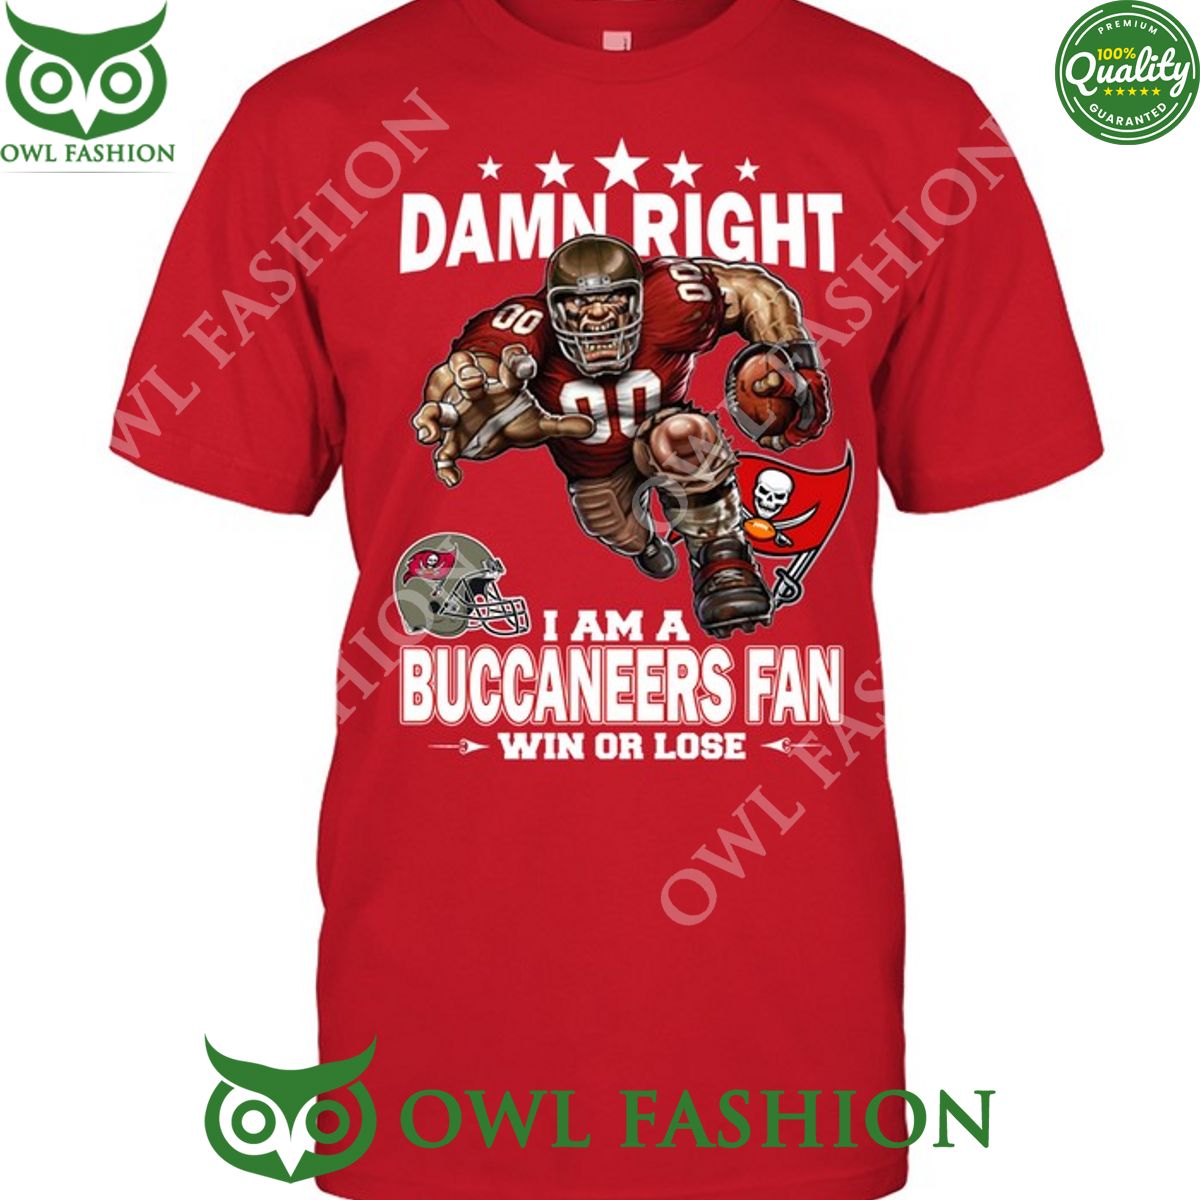 Damn Right Tampa Bay Buccaneers NFL Fan Win or lose t shirt